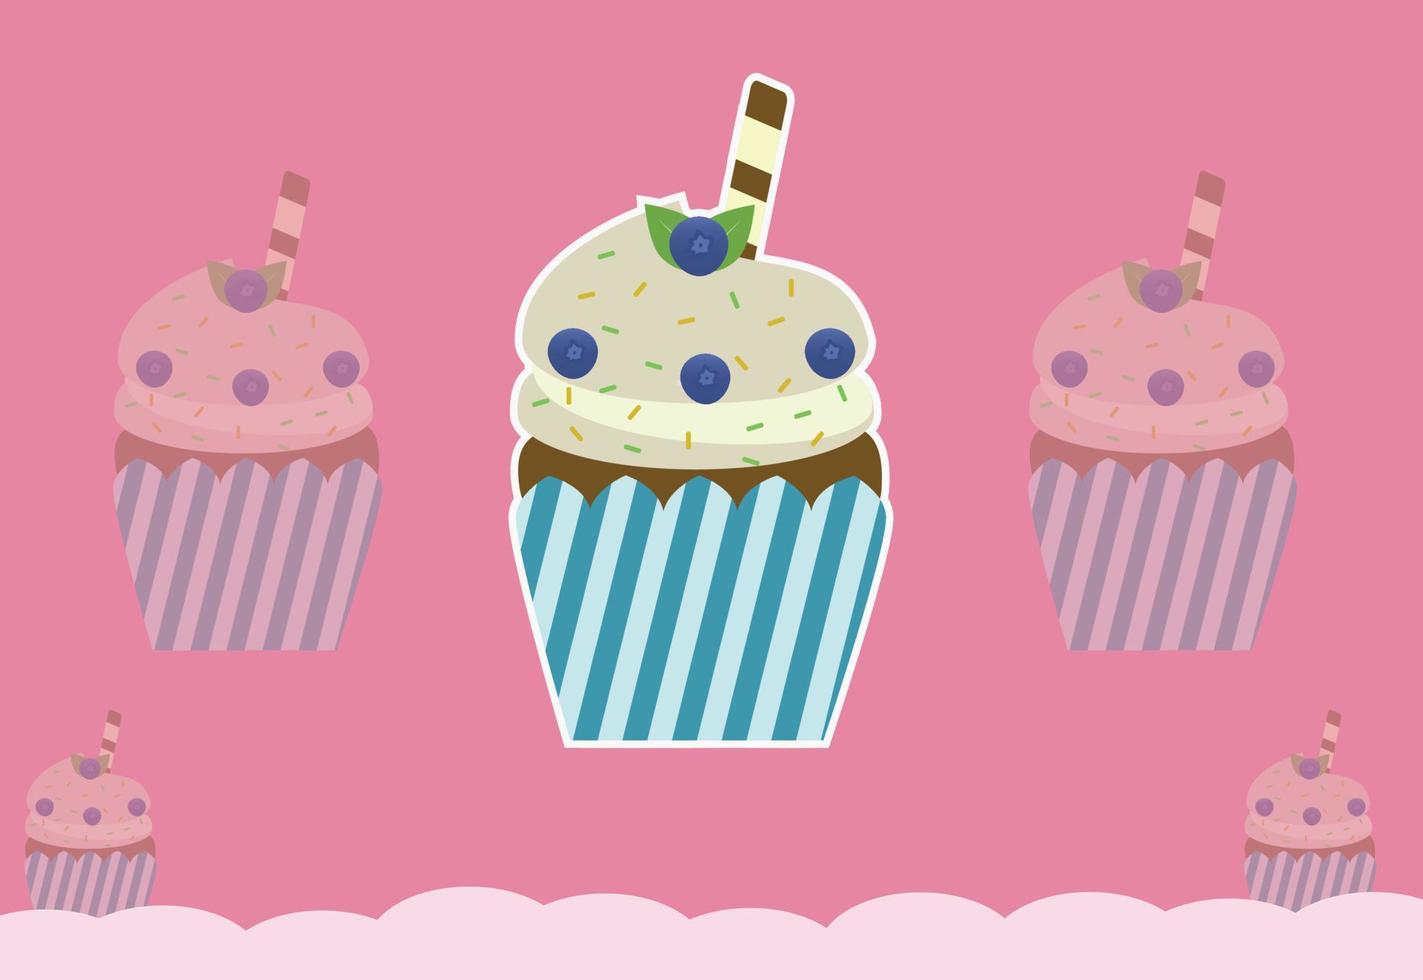 Blueberry and Wafer Delicious Cupcakes with Pink Background Vector Illustration